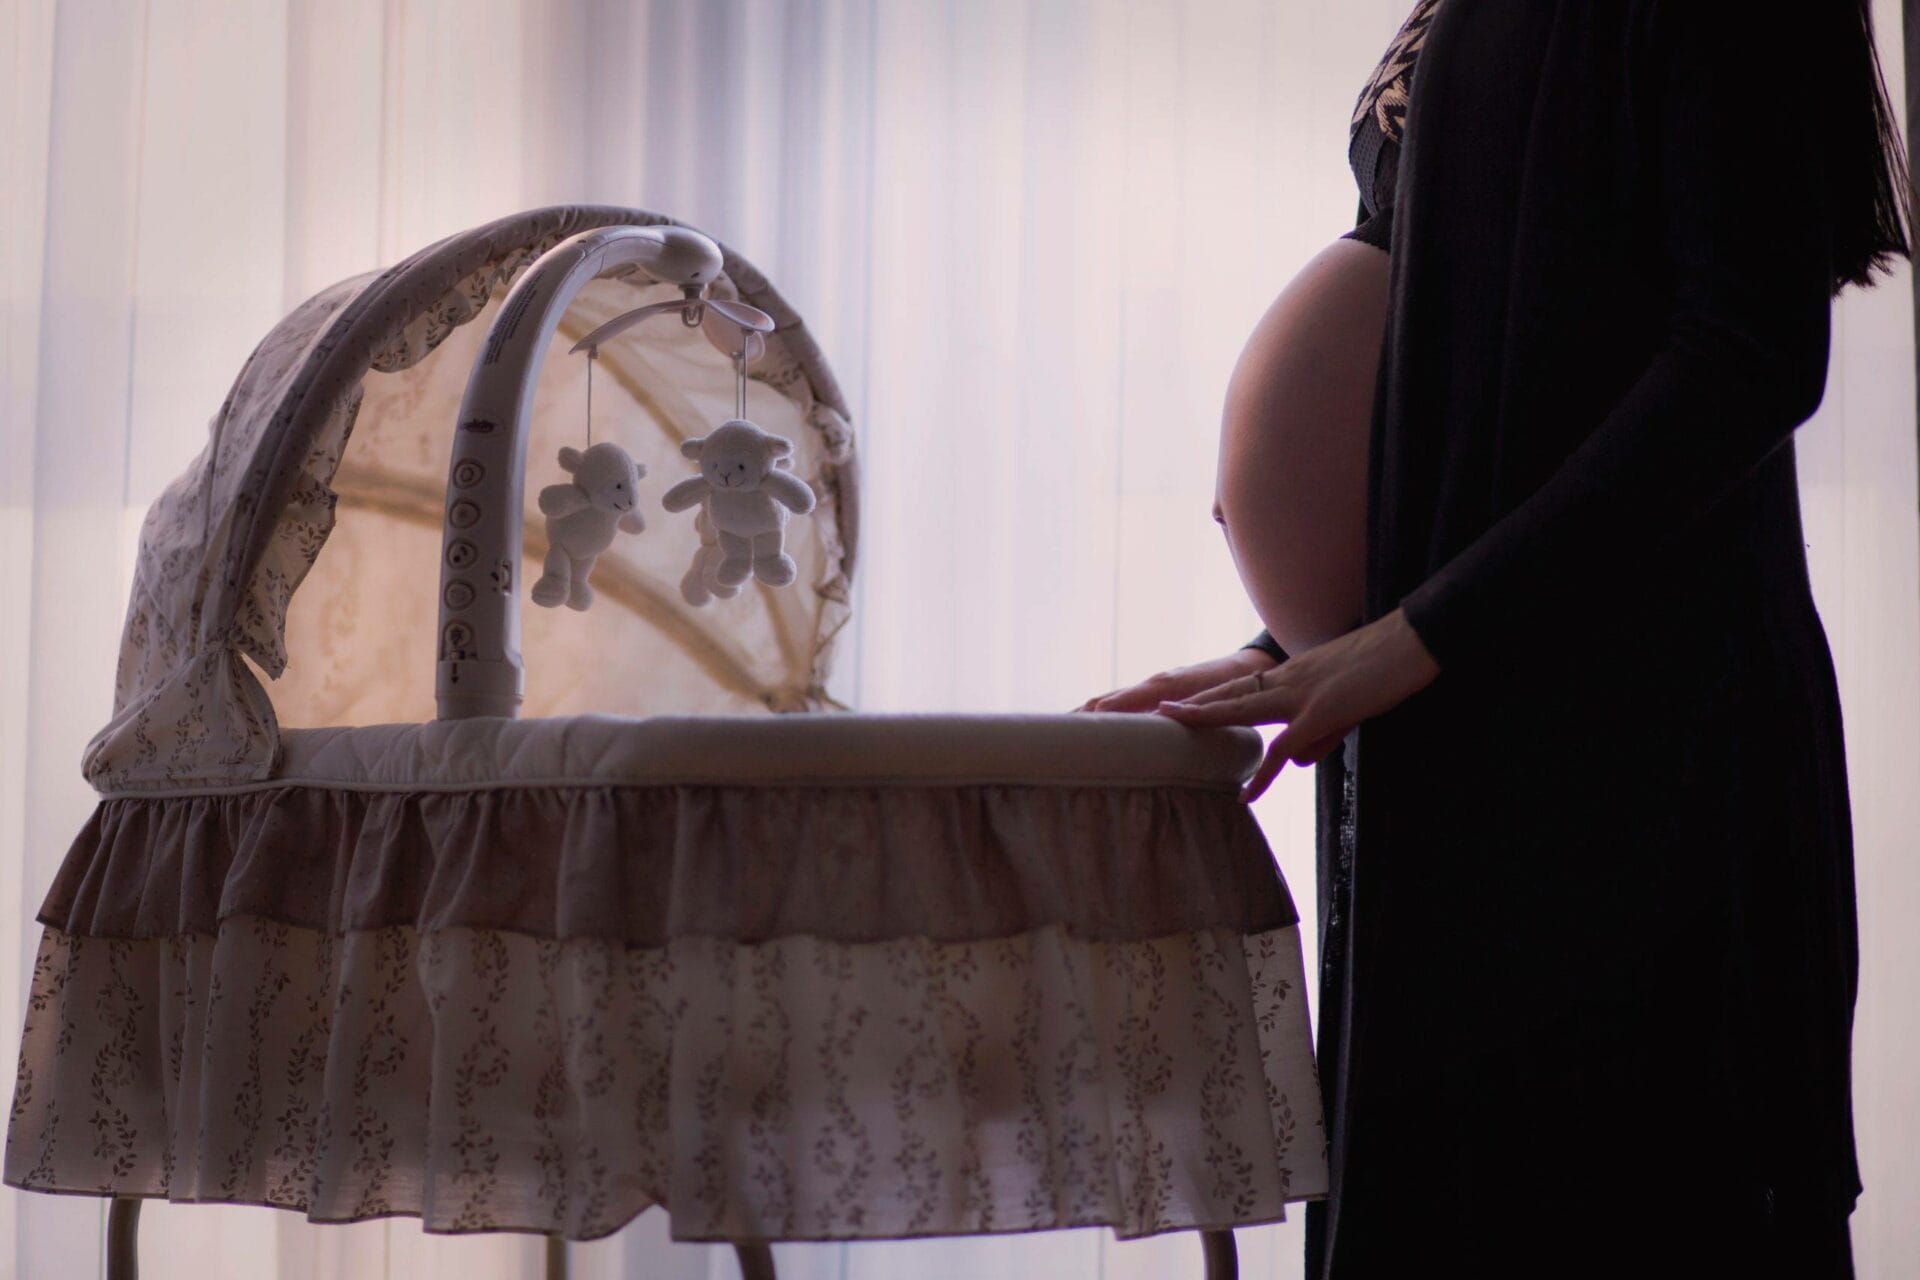 A pregnant woman standing next to a cradle.